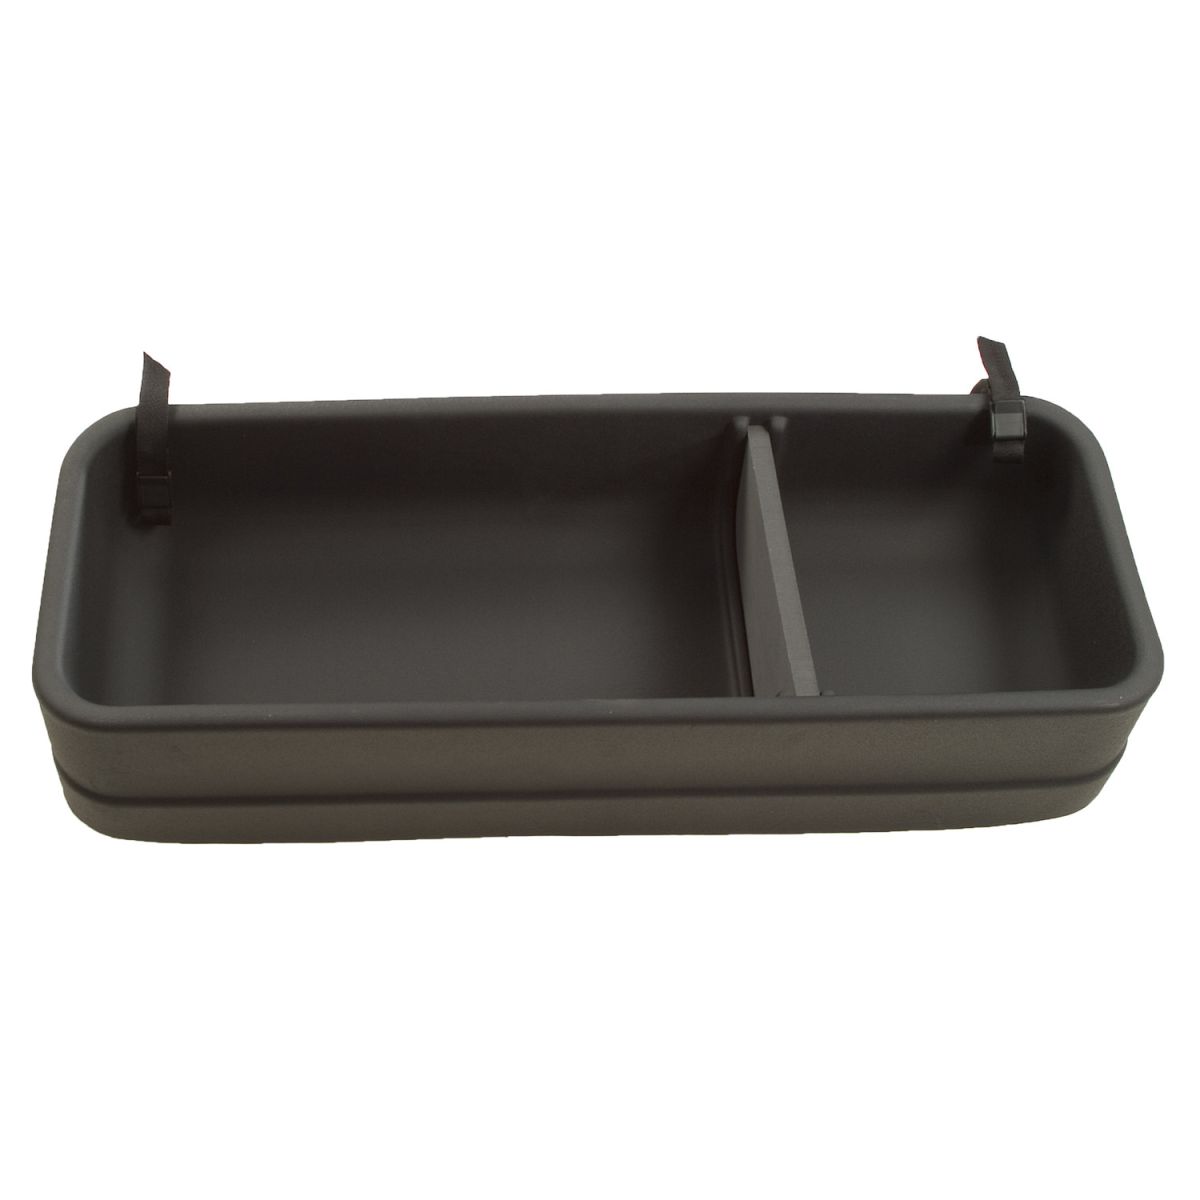 Husky Liners - Husky Liners Under Seat Storage Box 09-14 F-150 SuperCrew Cab With Subwoofer Under Rear Seat 09251